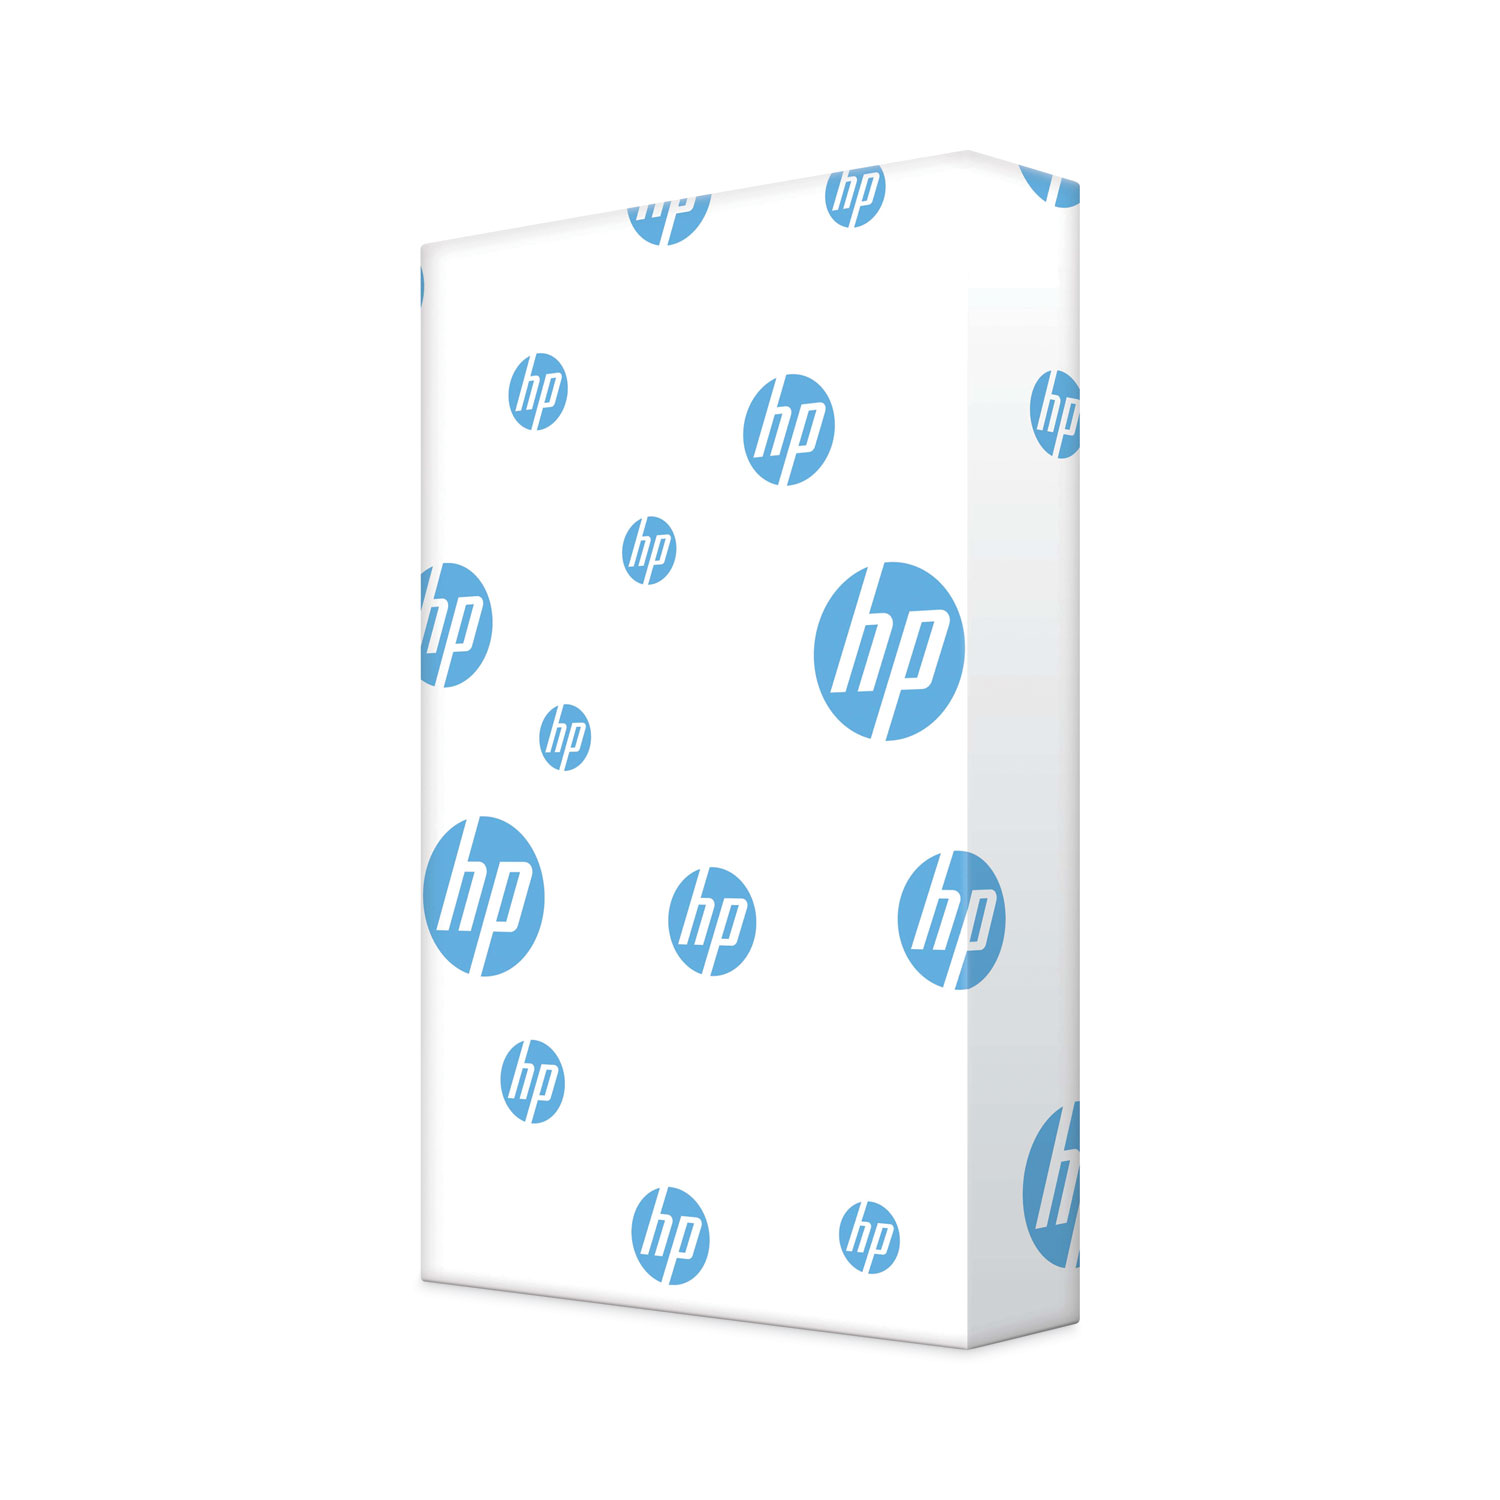  HP Printer Paper, 8.5 x 11 Paper, Office 20 lb, 5 Ream -  2,500 Sheets, 92 Bright, Made in USA - FSC Certified